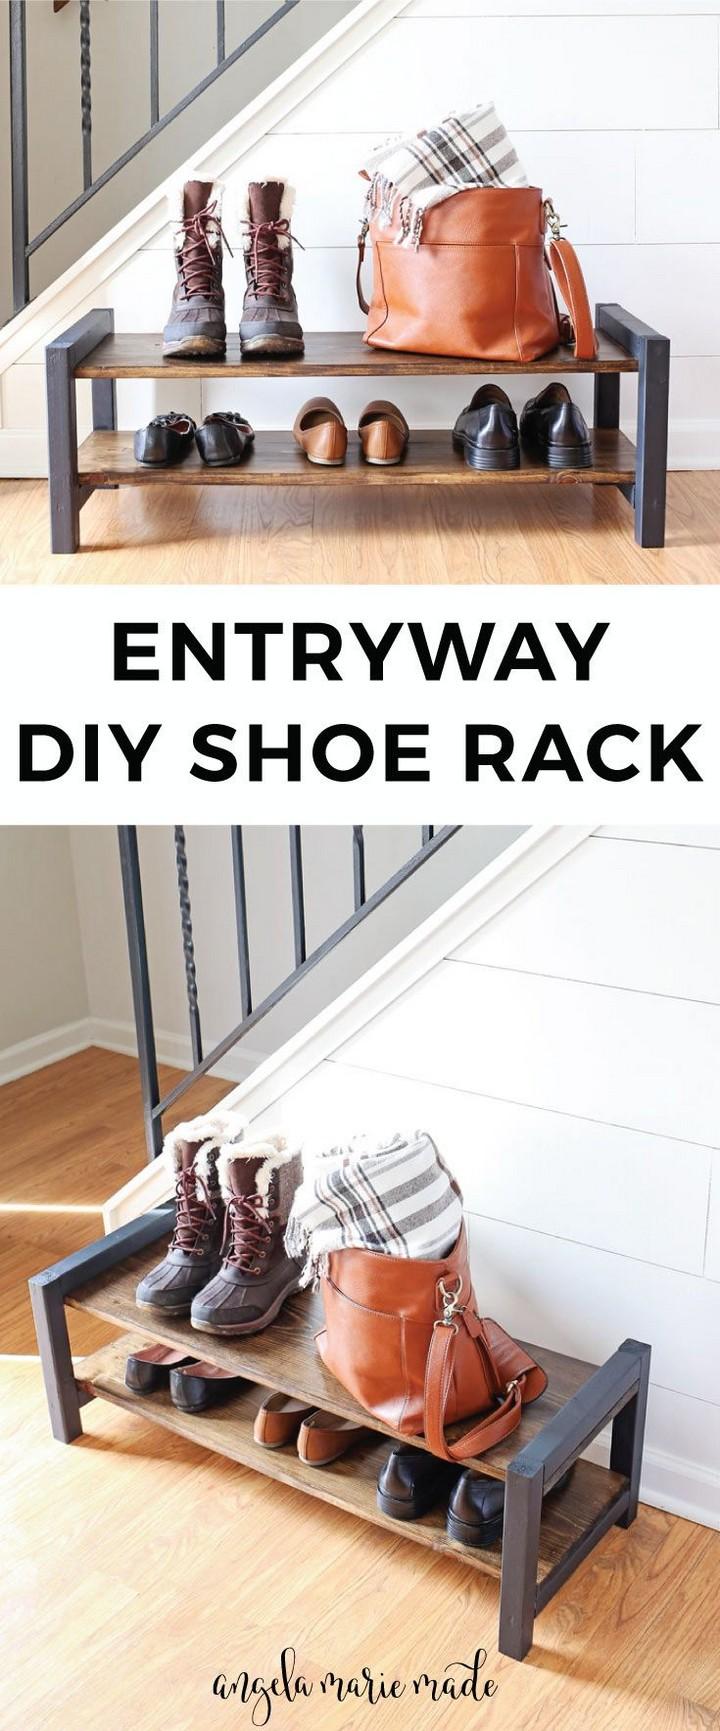 How to Build an Entryway DIY Shoe Rack